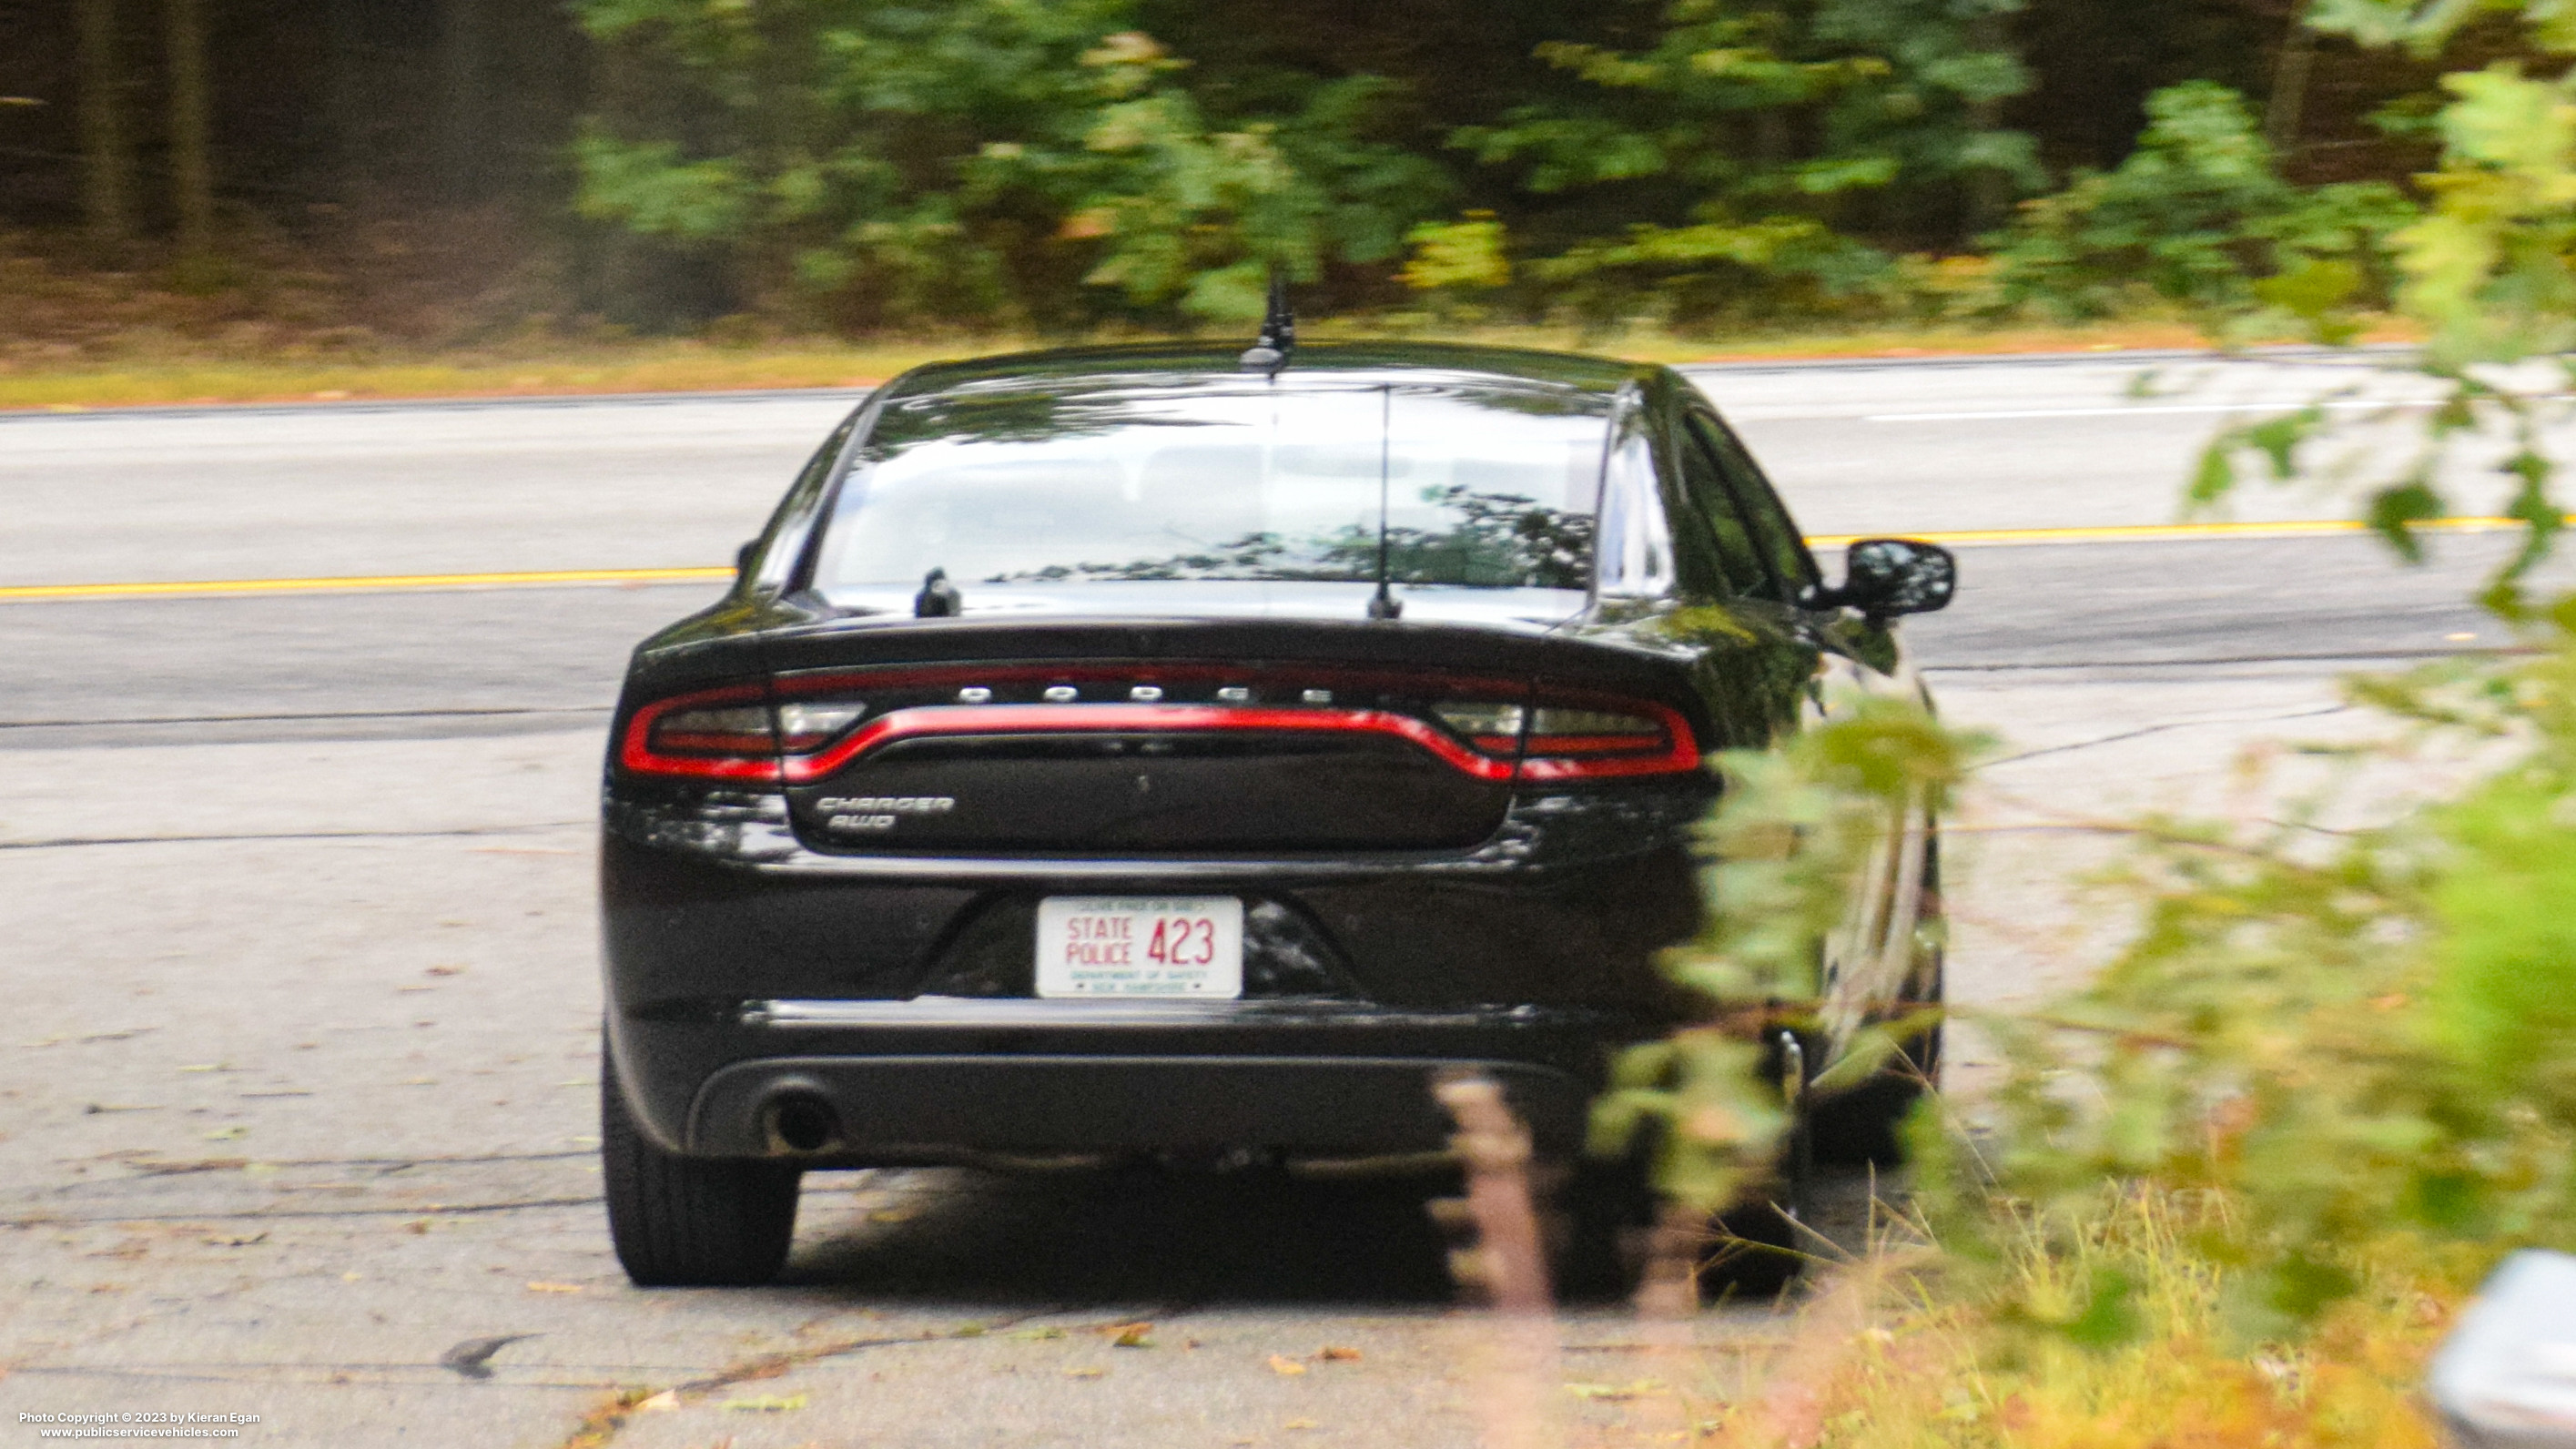 A photo  of New Hampshire State Police
            Cruiser 423, a 2017-2021 Dodge Charger             taken by Kieran Egan